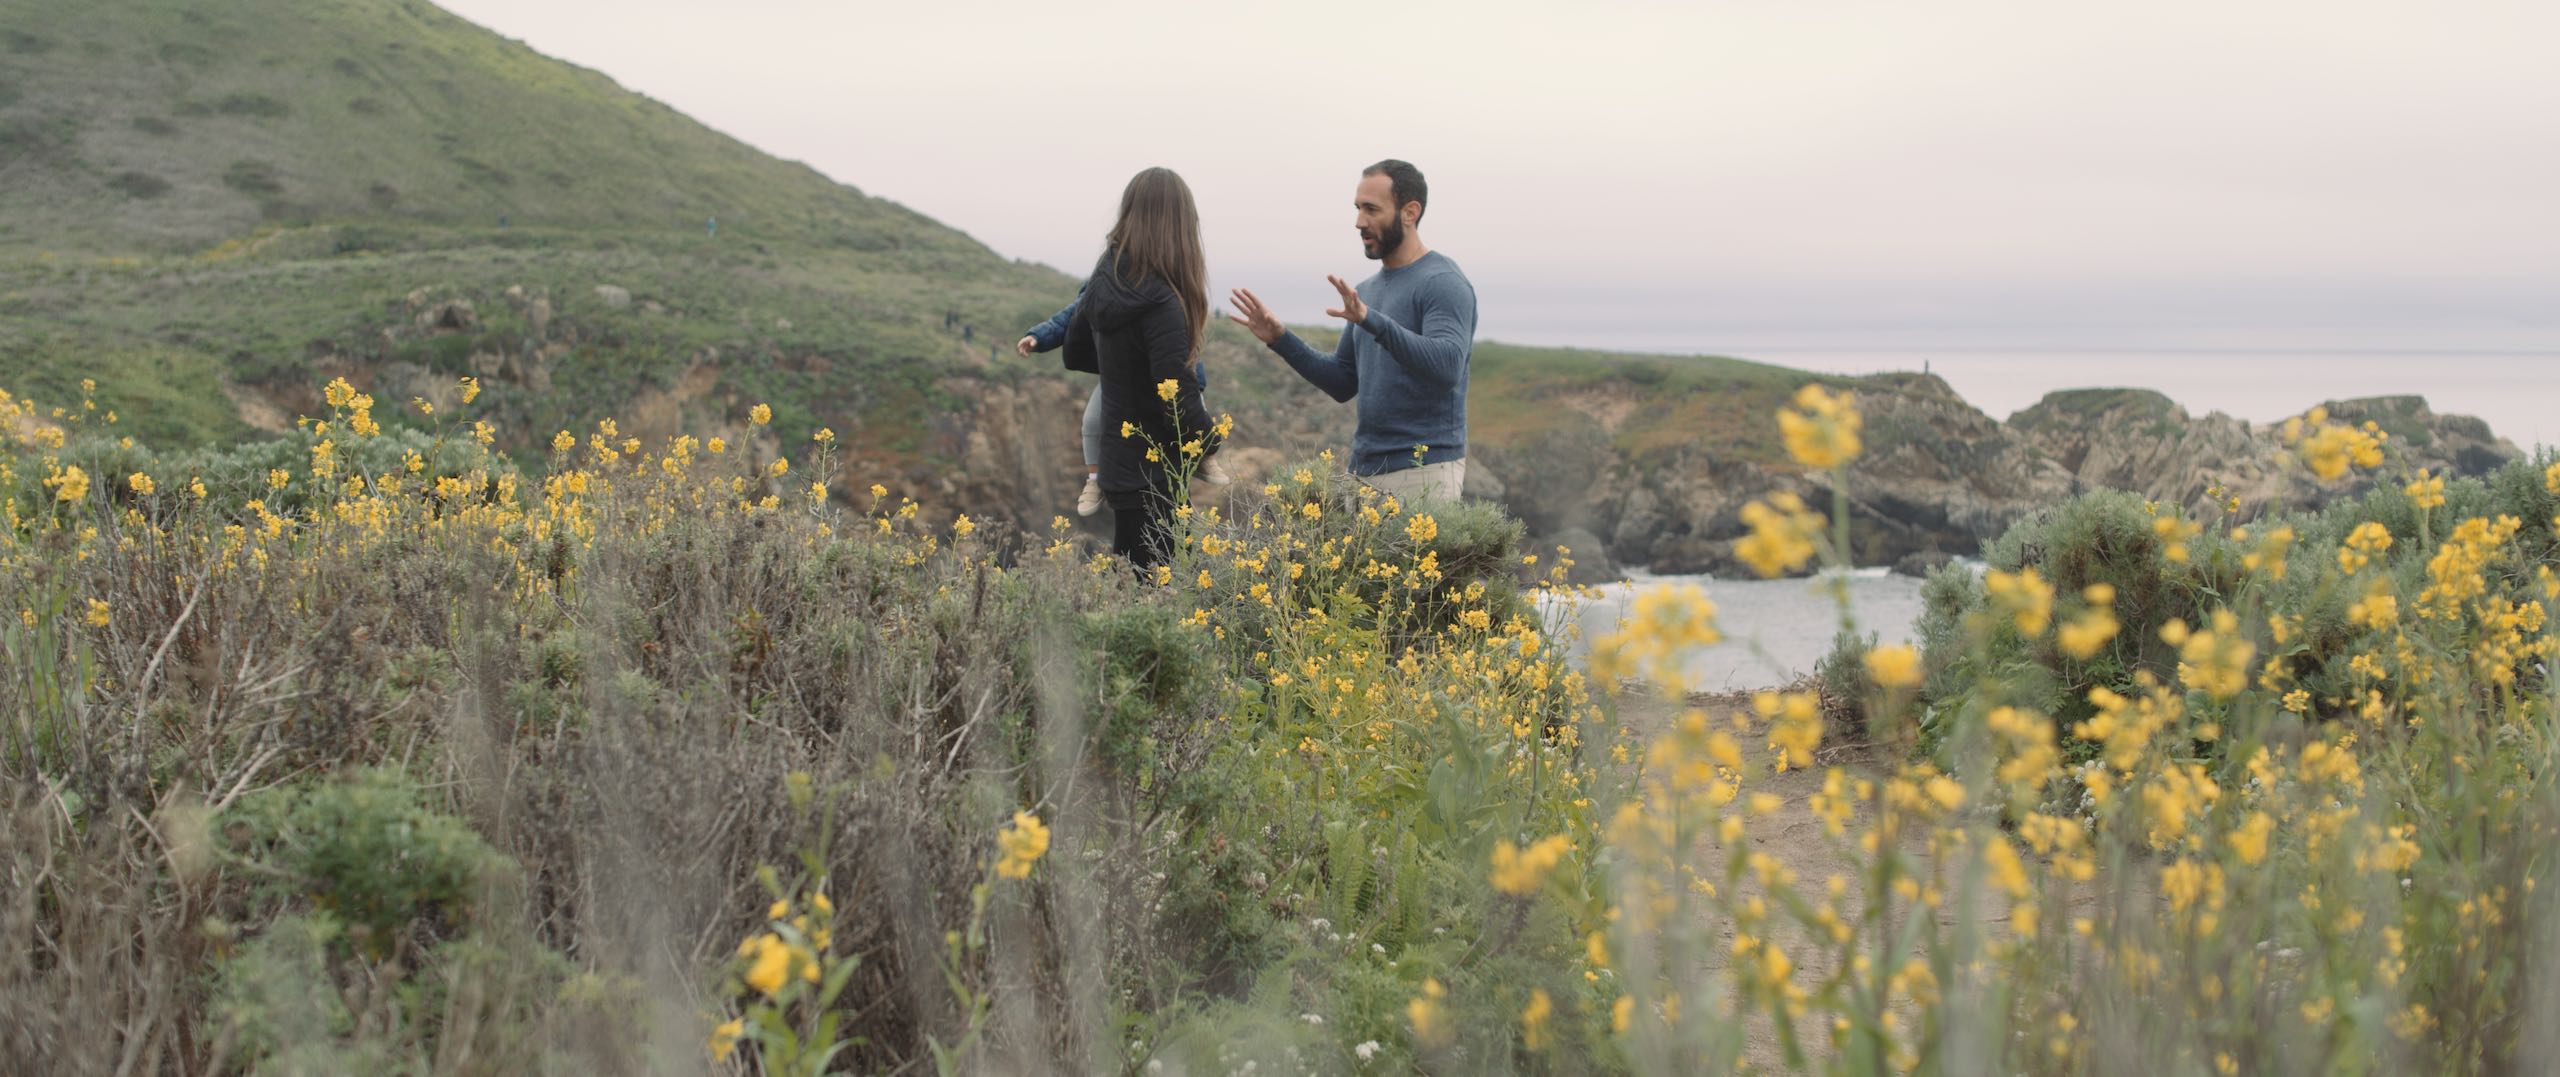 Dailies 203 Big Sur Video Production Company Los Angeles Still showing man and woman who is holding a child talking to each other near the coastline with wildflowers in the foreground